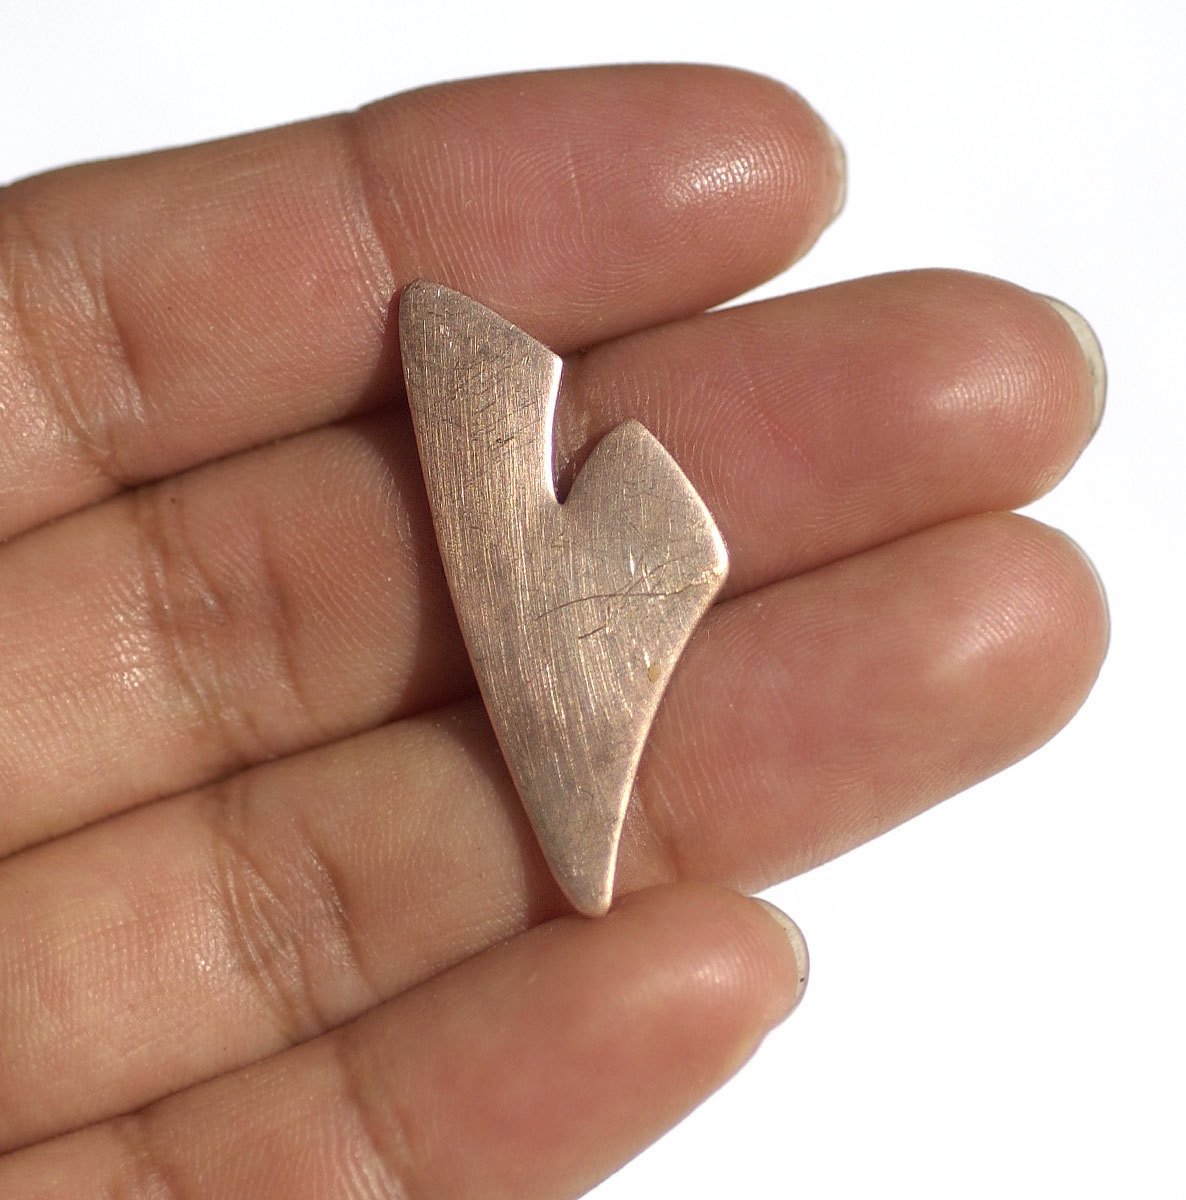 Artistic Gingko Leaf  36mm x 21mm Blank Cutout for Enameling Stamping Texturing Variety of Metals